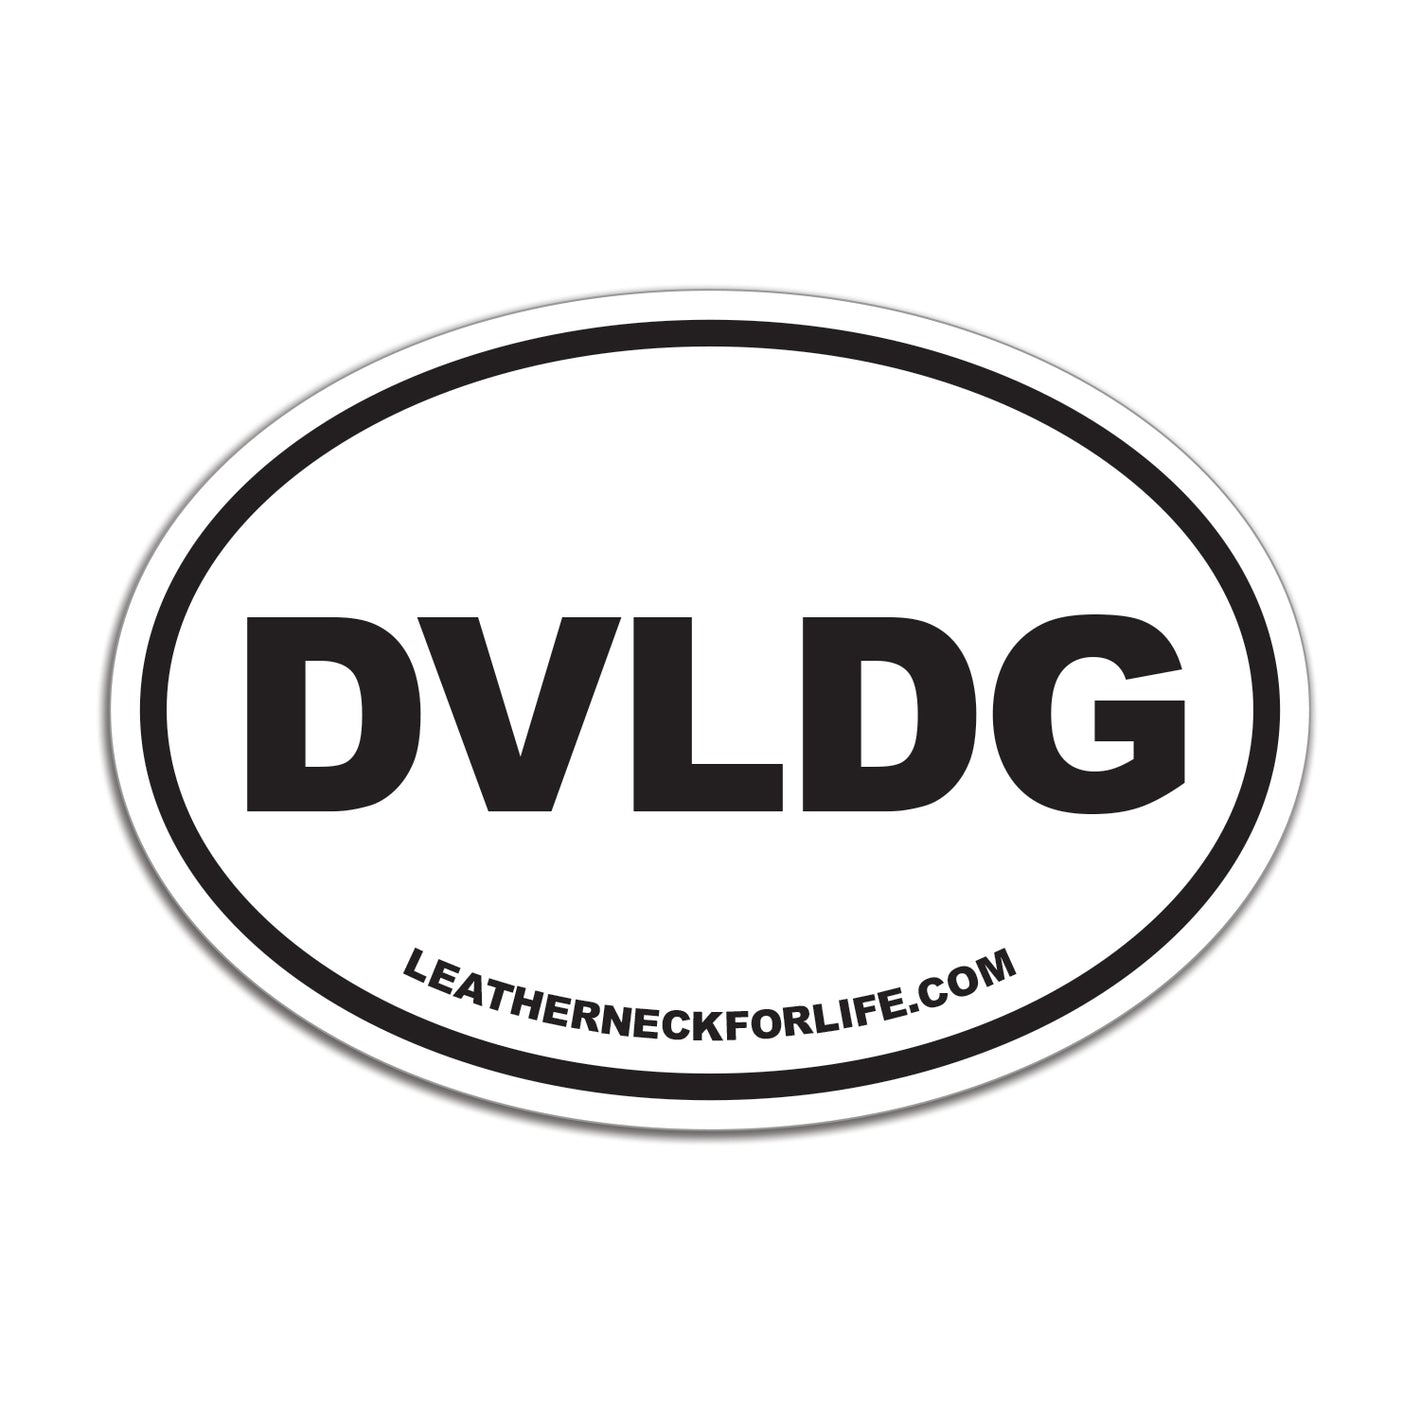 DVLDG Oval Decal